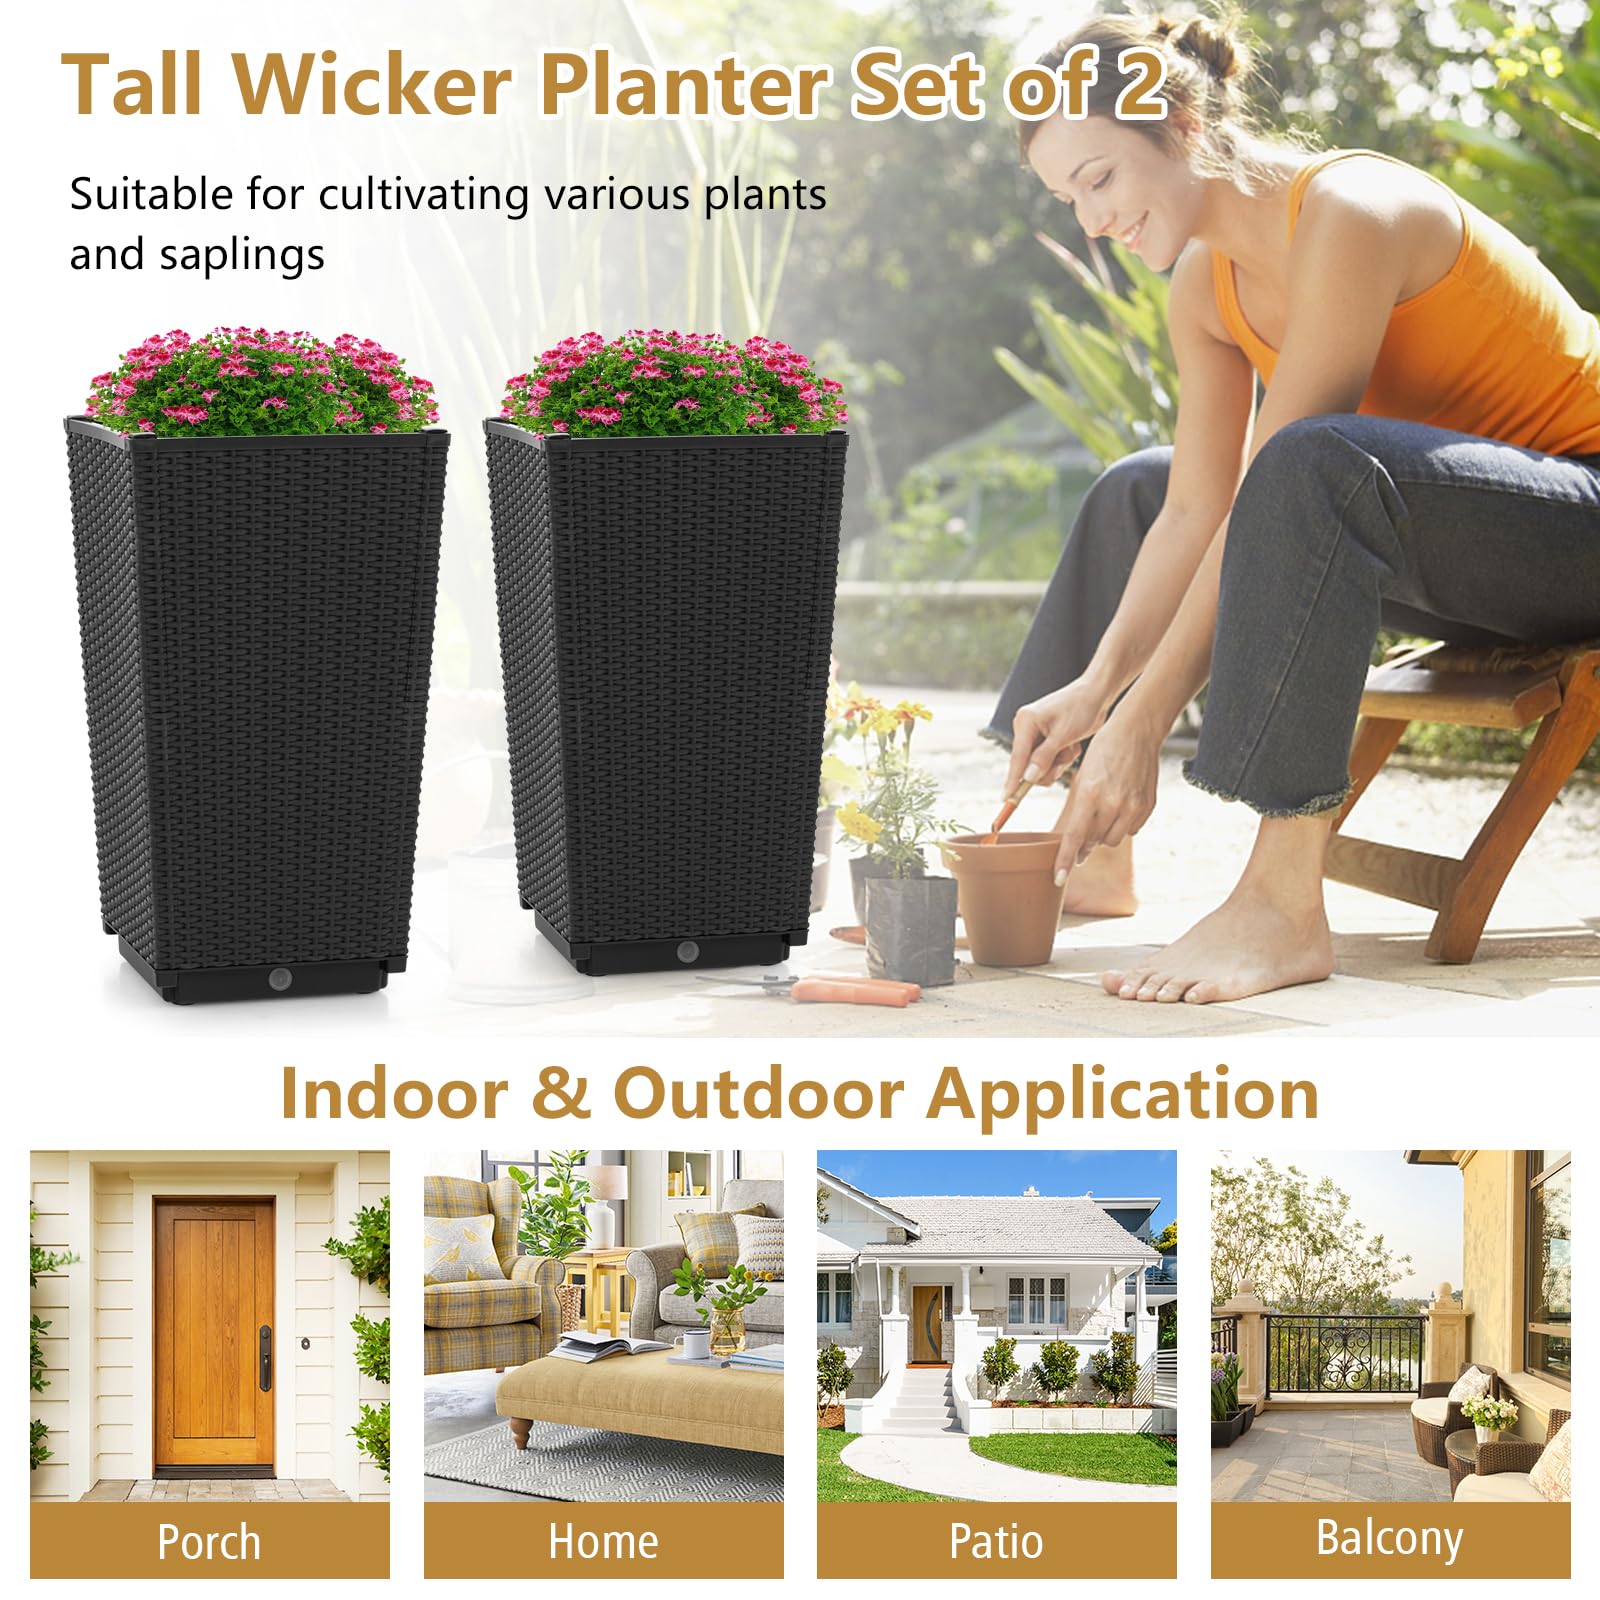 Giantex Outdoor Wicker Flower Pot Set of 2, 22.5” Tall Planters with Drainage Hole, Self-Watering Tray